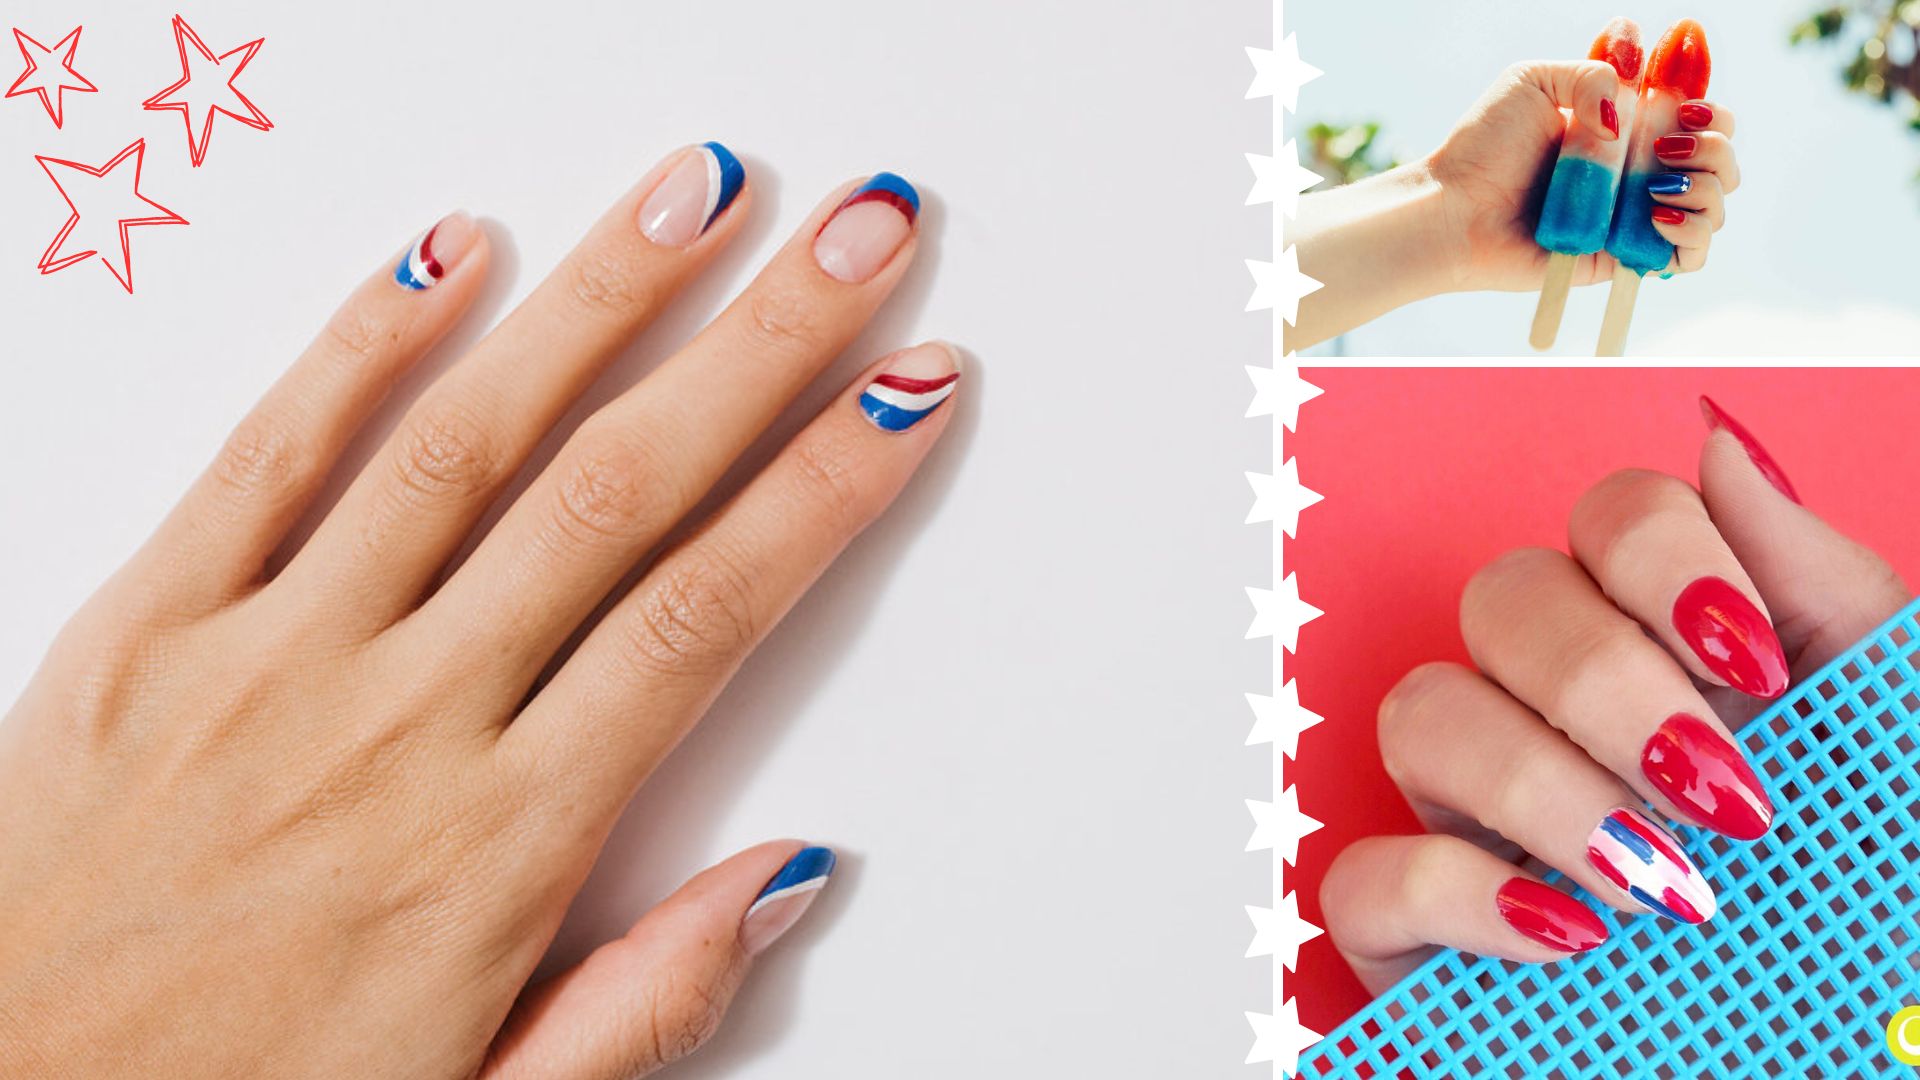 8. Cute and Simple Nail Designs for July 4th - wide 3